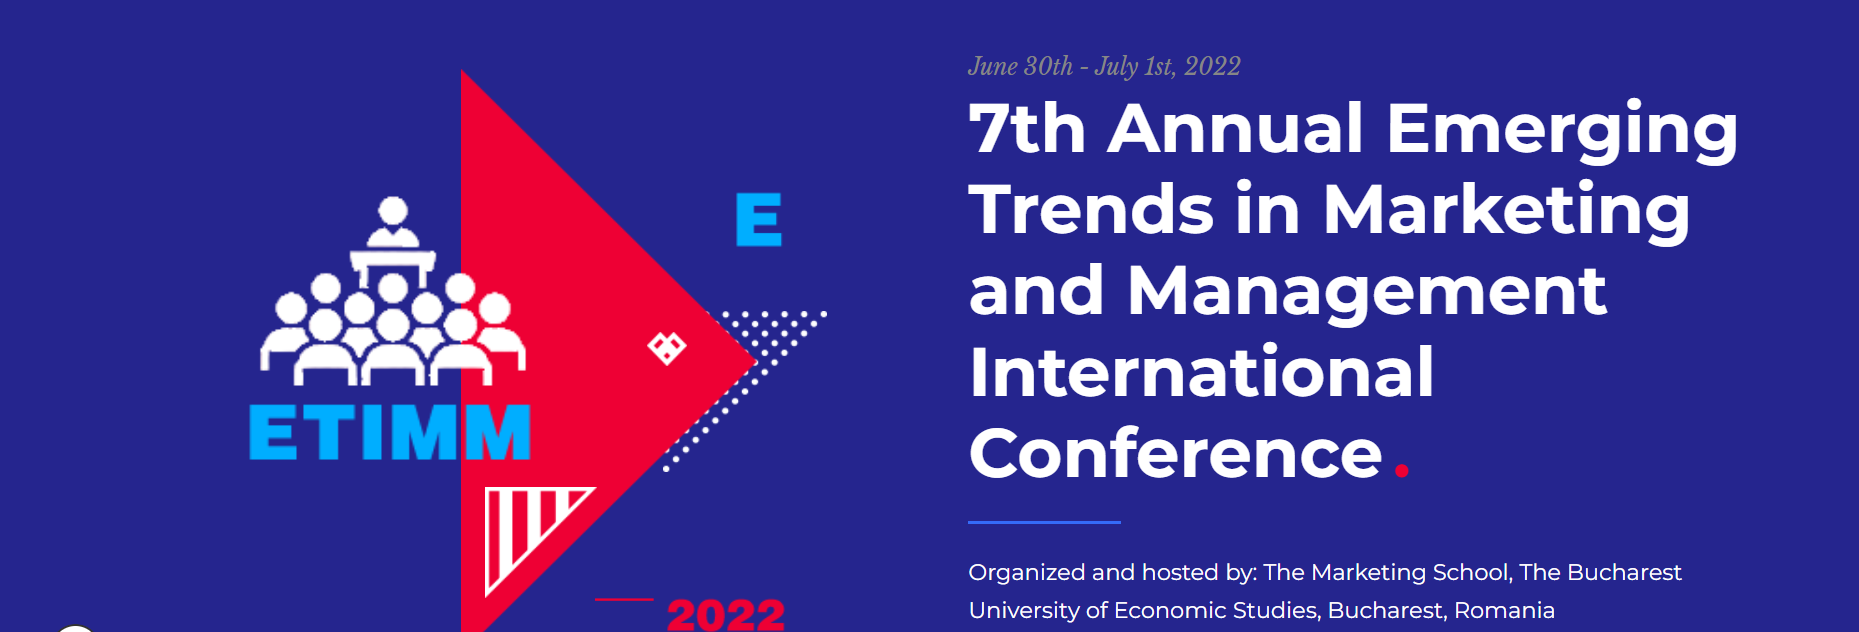 Annual Emerging Trends in Marketing and Management International Conference 2022